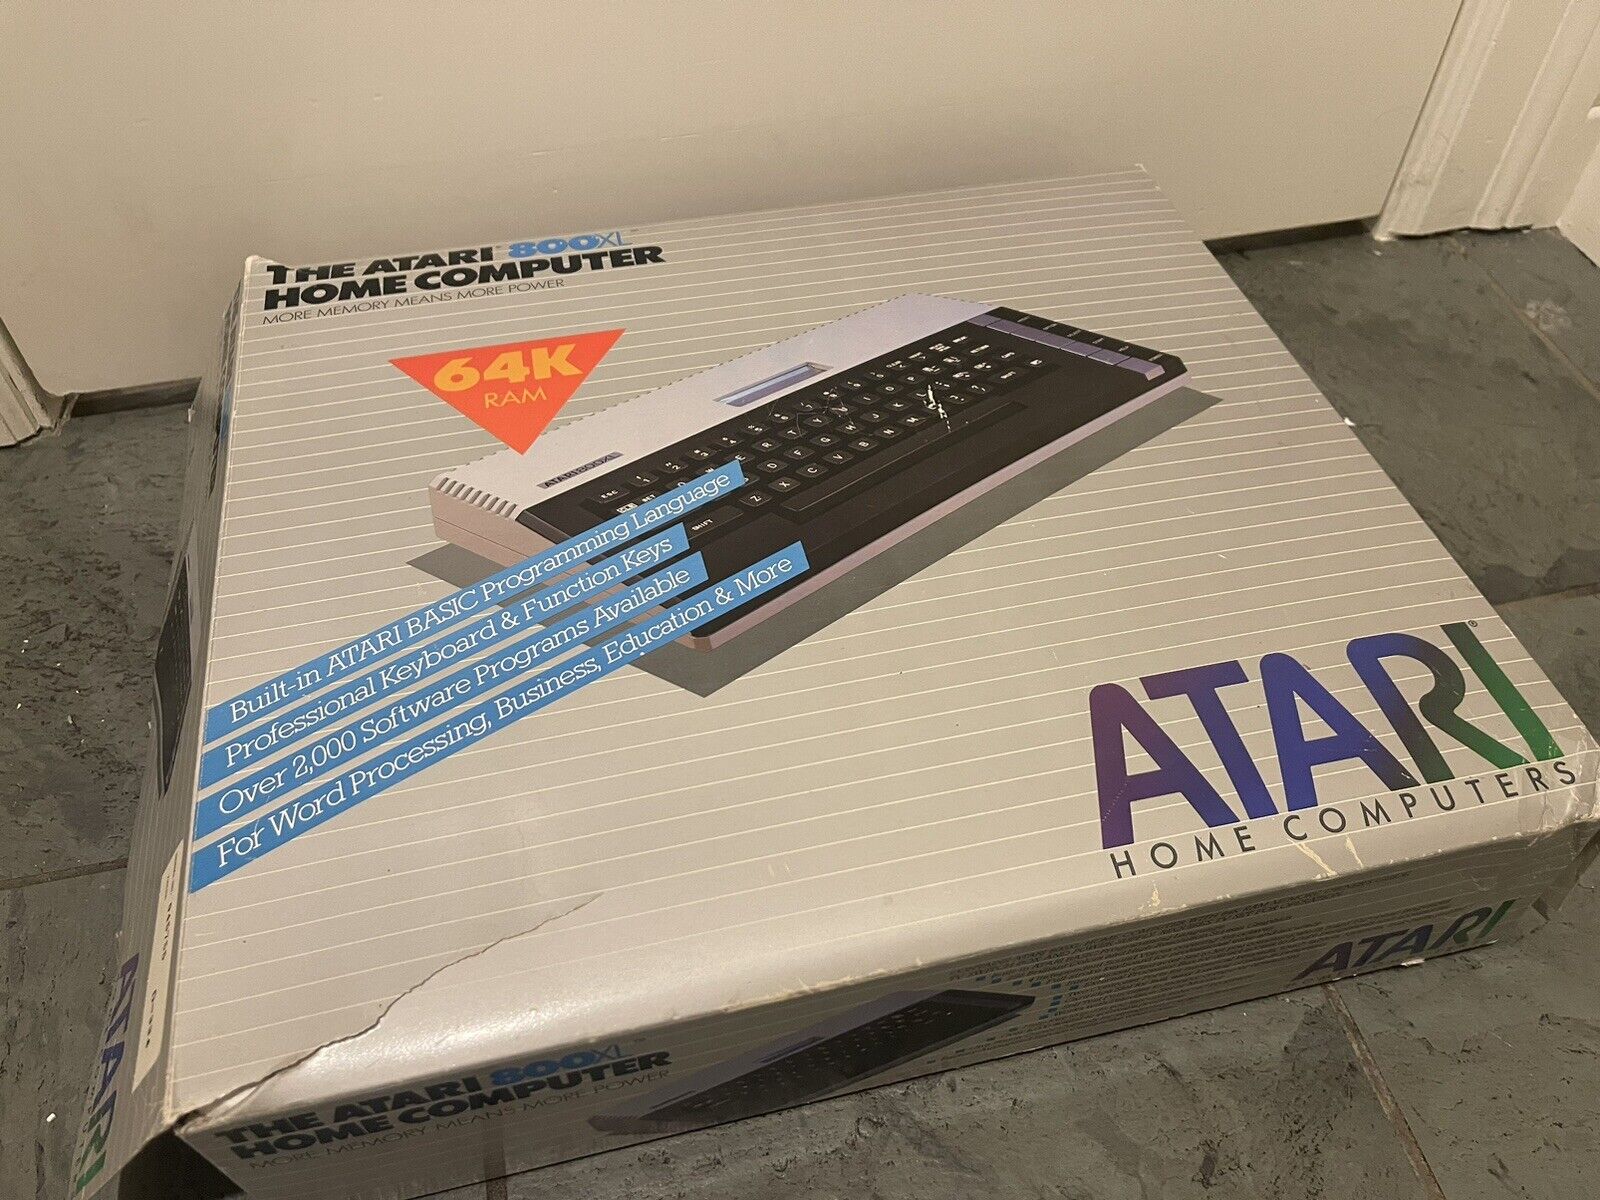 Vintage Atari 800XL Home Computer 64K RAM in Box With Power Supply and Cables